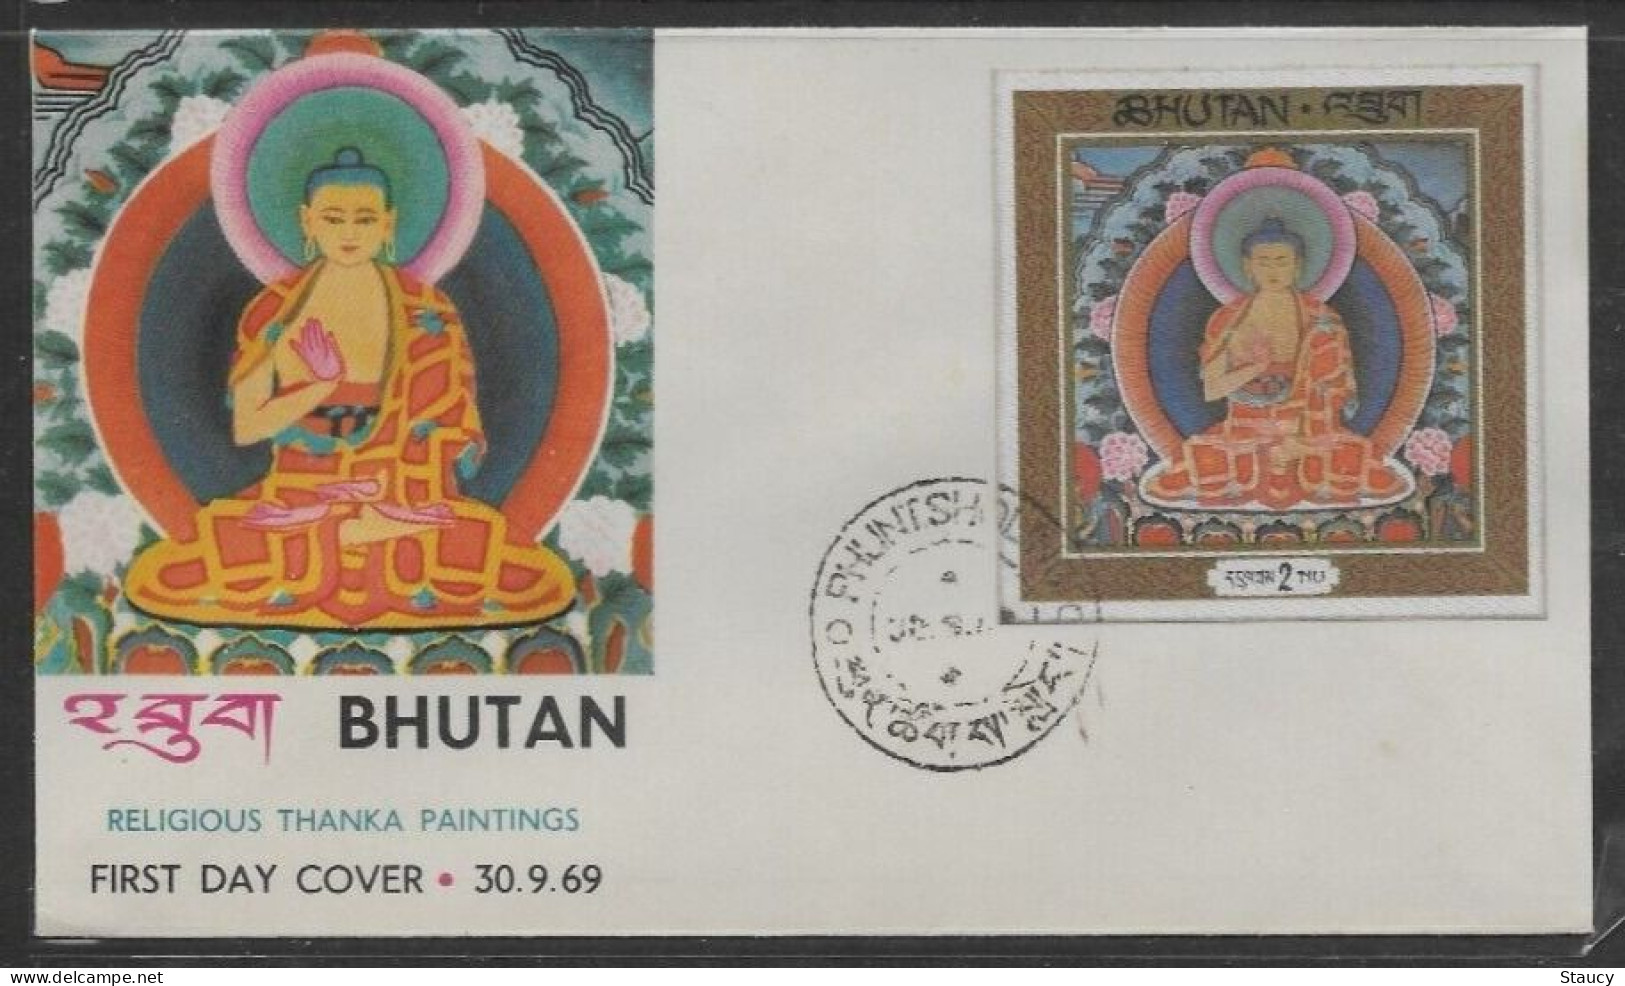 BHUTAN 1969 RELIGIOUS THANKA PAINTINGS BUDHA - SILK CLOTH Unique Stamp Imperf 1v Official FDC As Per Scan - Bhoutan